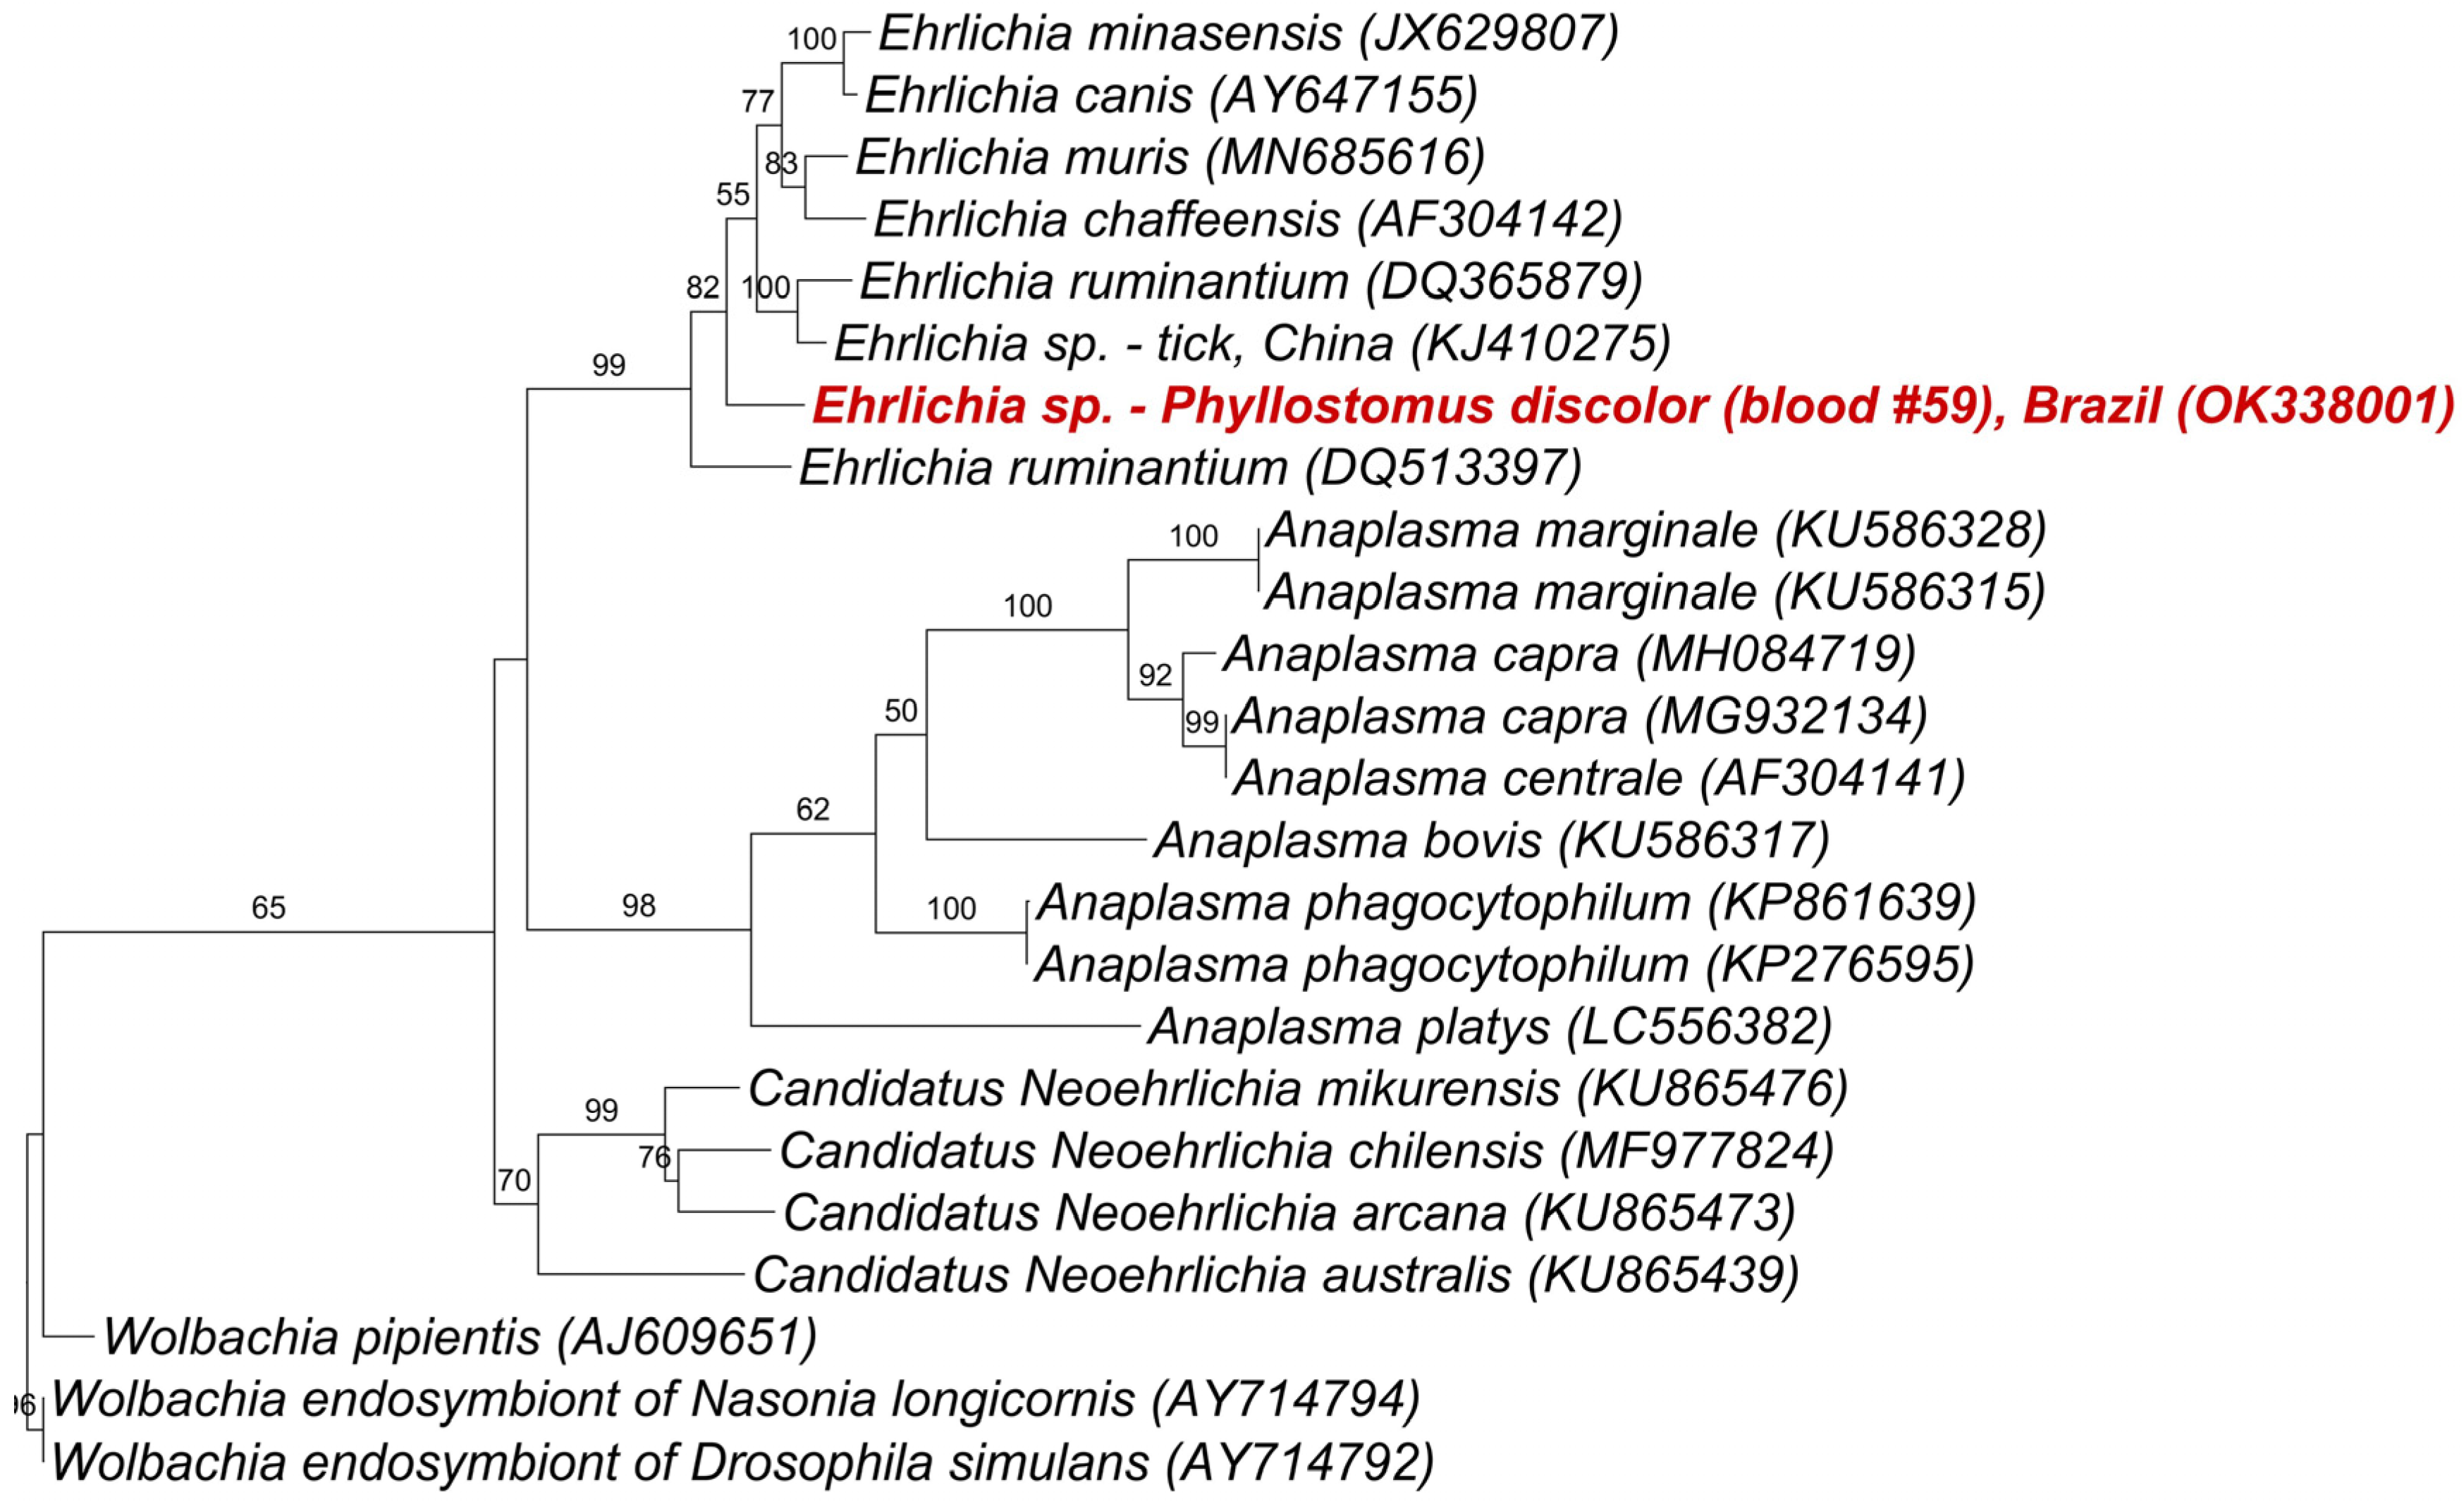 Parasitologia | Free Full-Text | Molecular Survey of Anaplasmataceae Agents  and Coxiellaceae in Non-Hematophagous Bats and Associated Ectoparasites  from Brazil | HTML